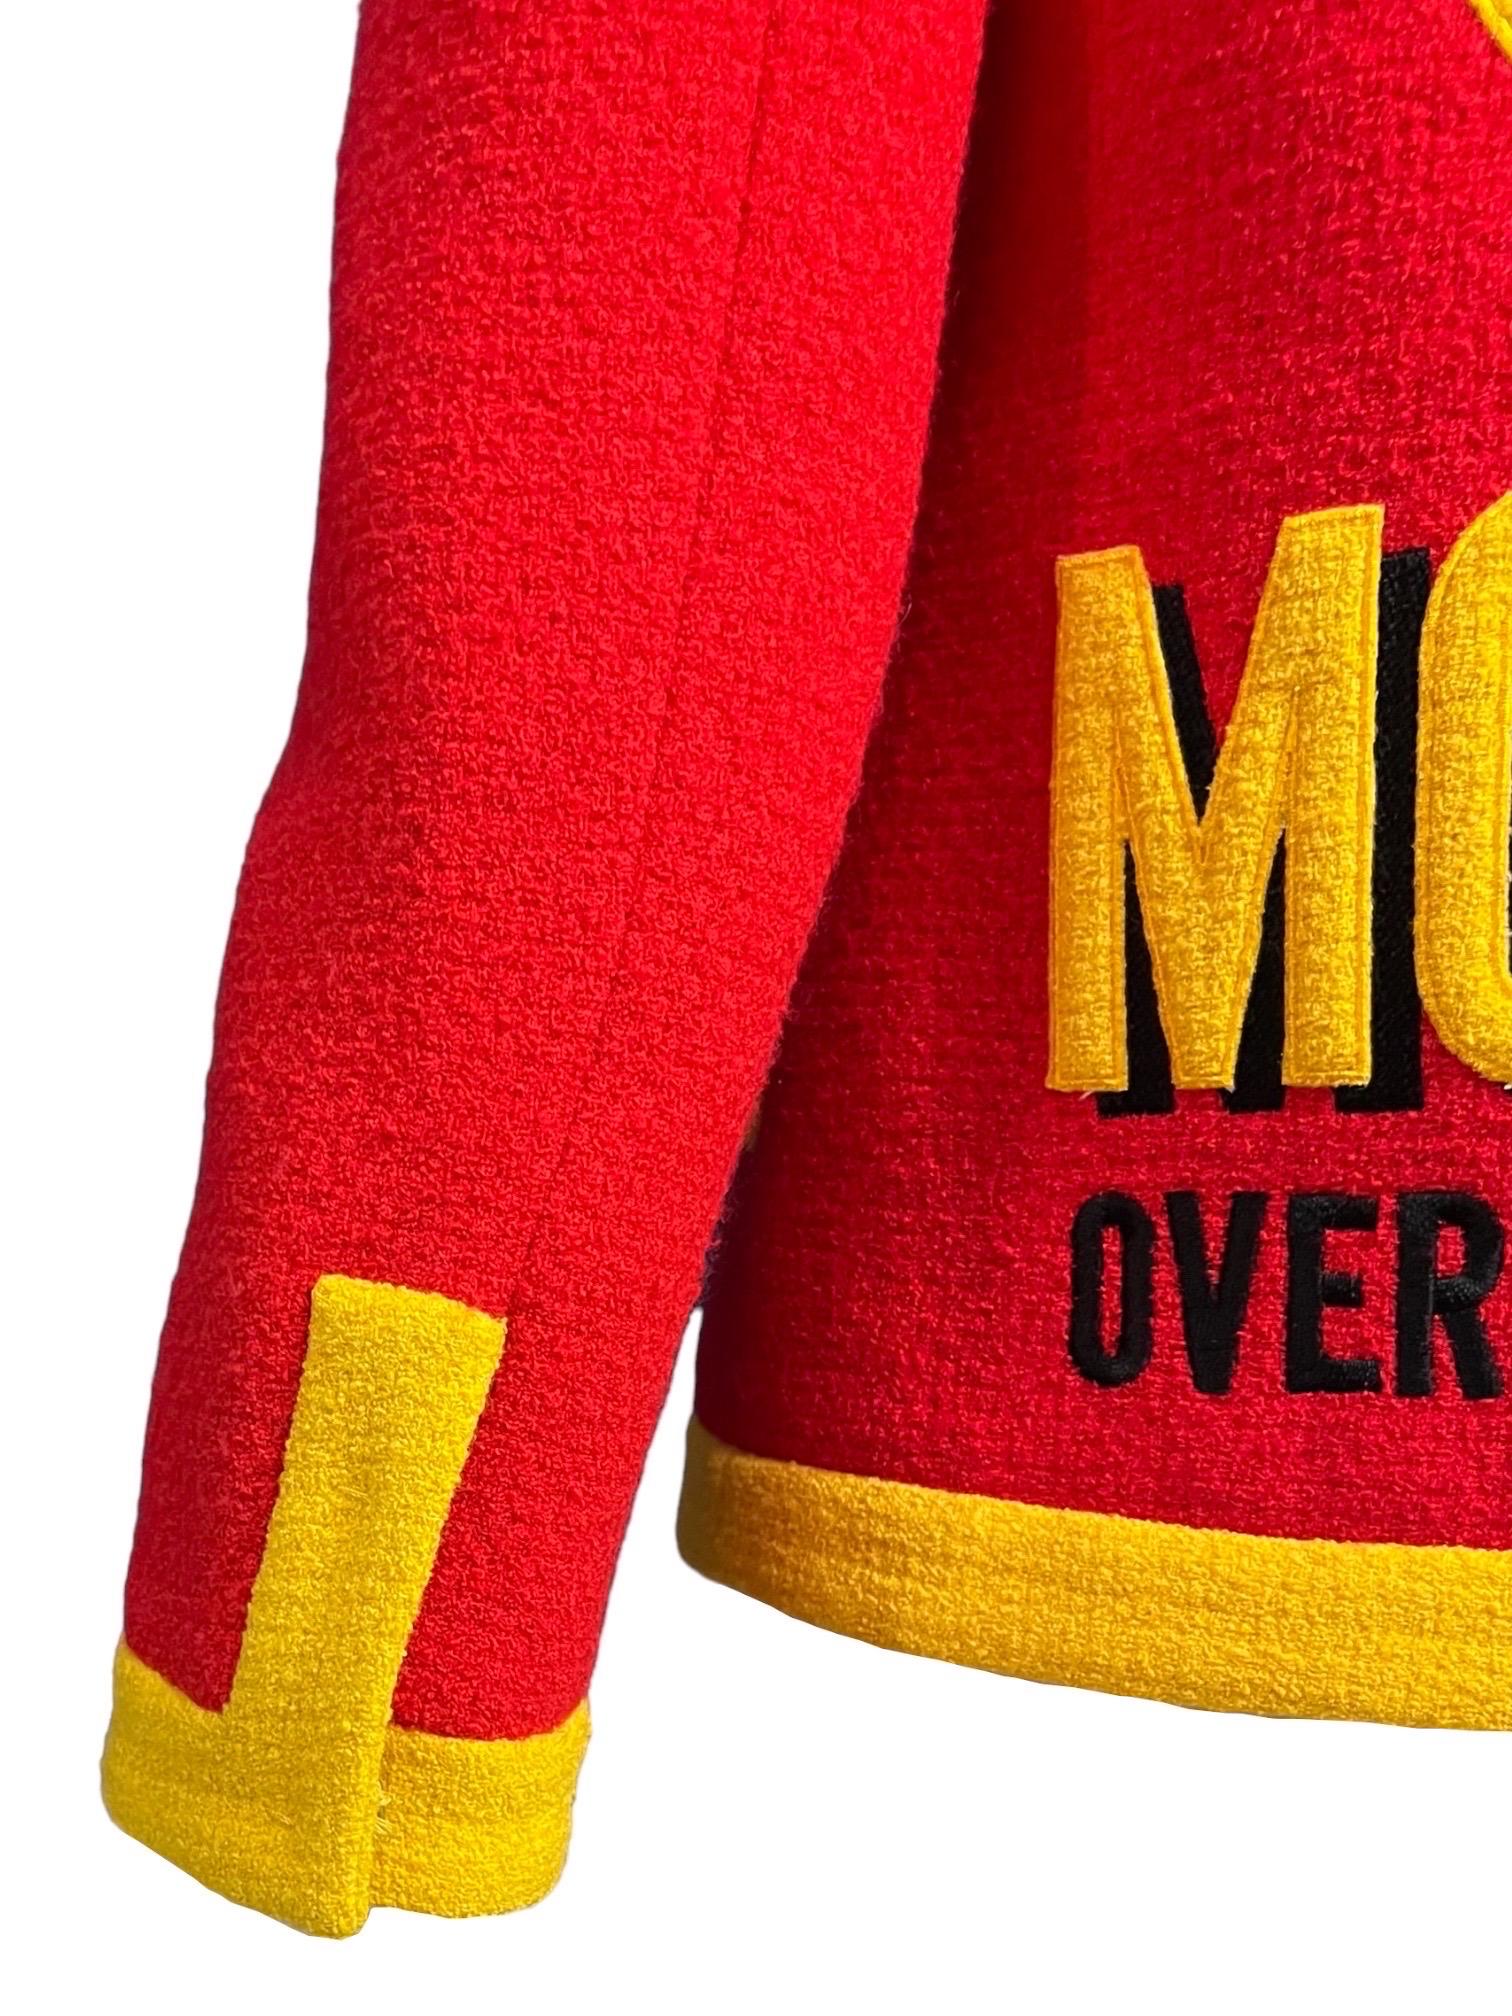 Moschino Couture McDonalds Runway Tweed Blazer F/W 2014 For Sale 9